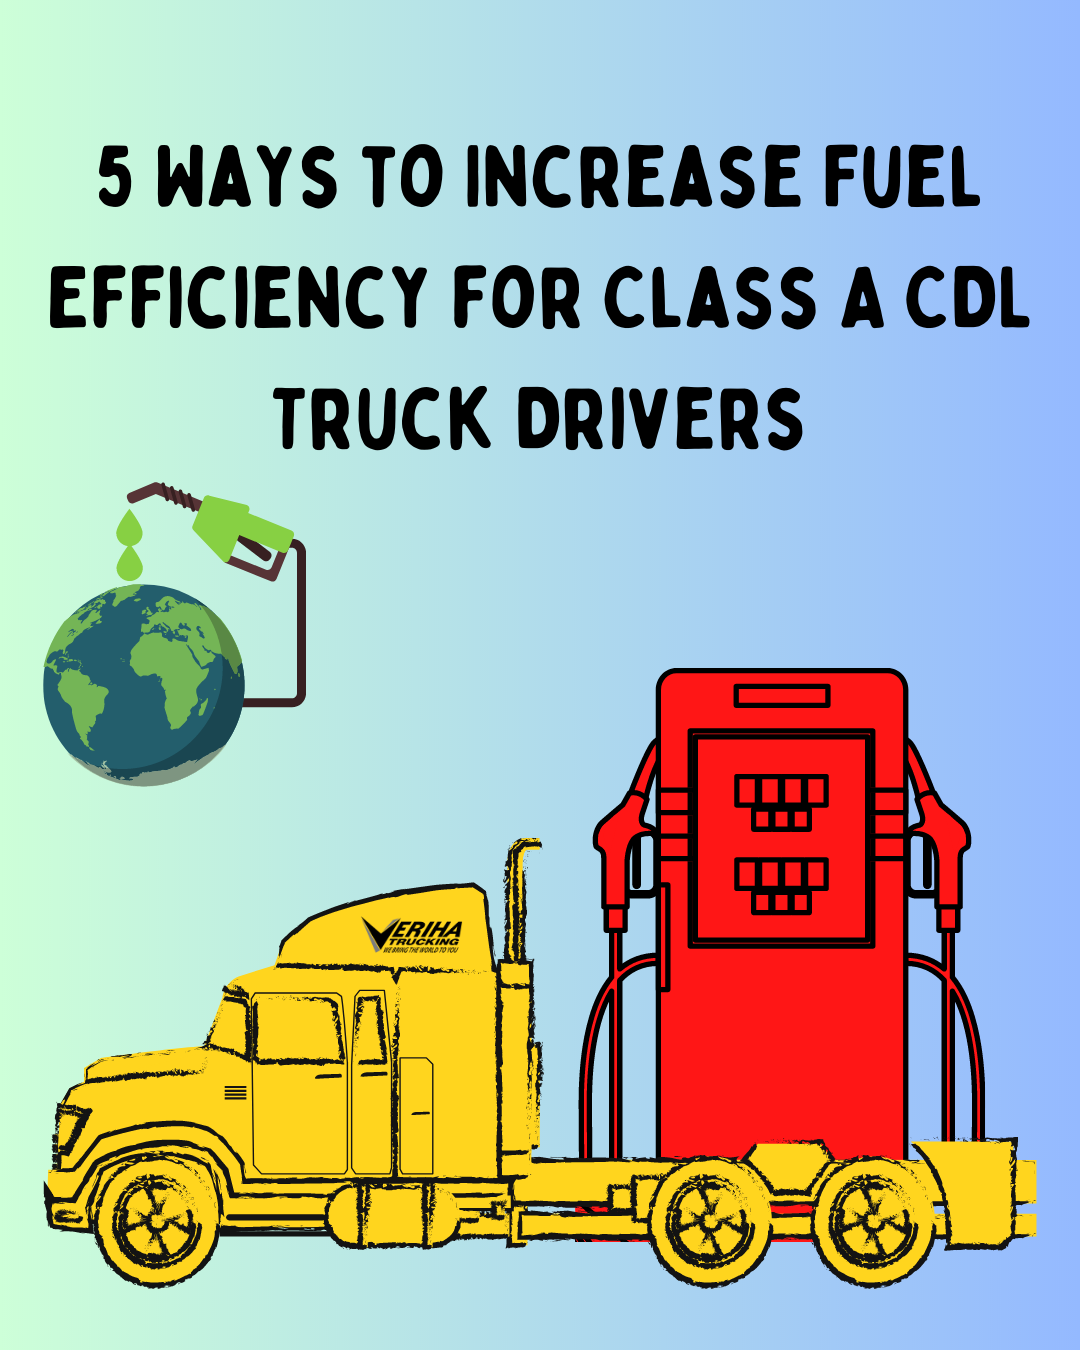 5 Ways to Increase Fuel Efficiency for Class A CDL Truck Drivers